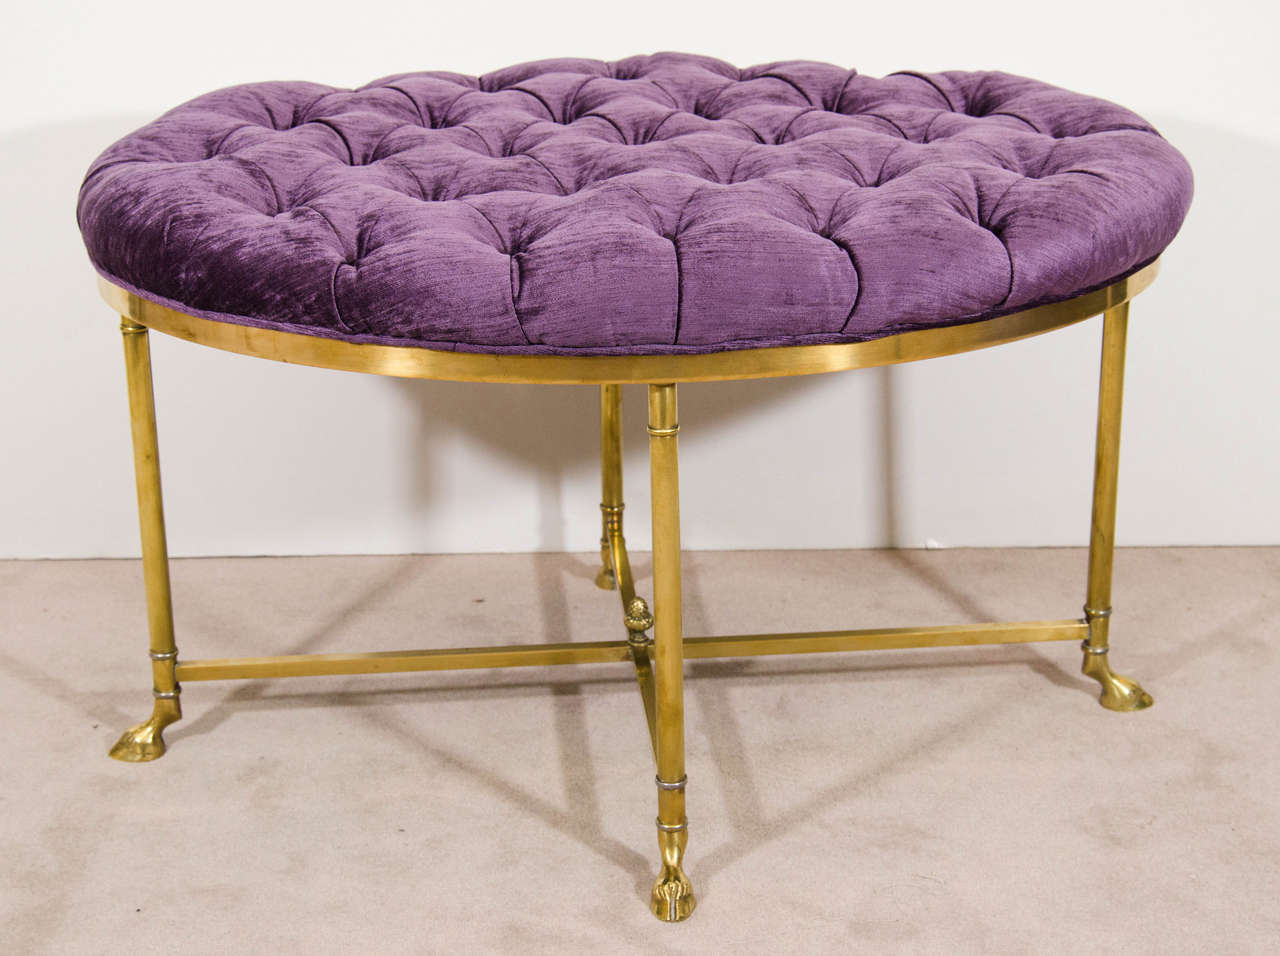 A vintage La Barge oval bench with purple button tufted velvet upholstery and brass hoof feet. Newly reupholstered.